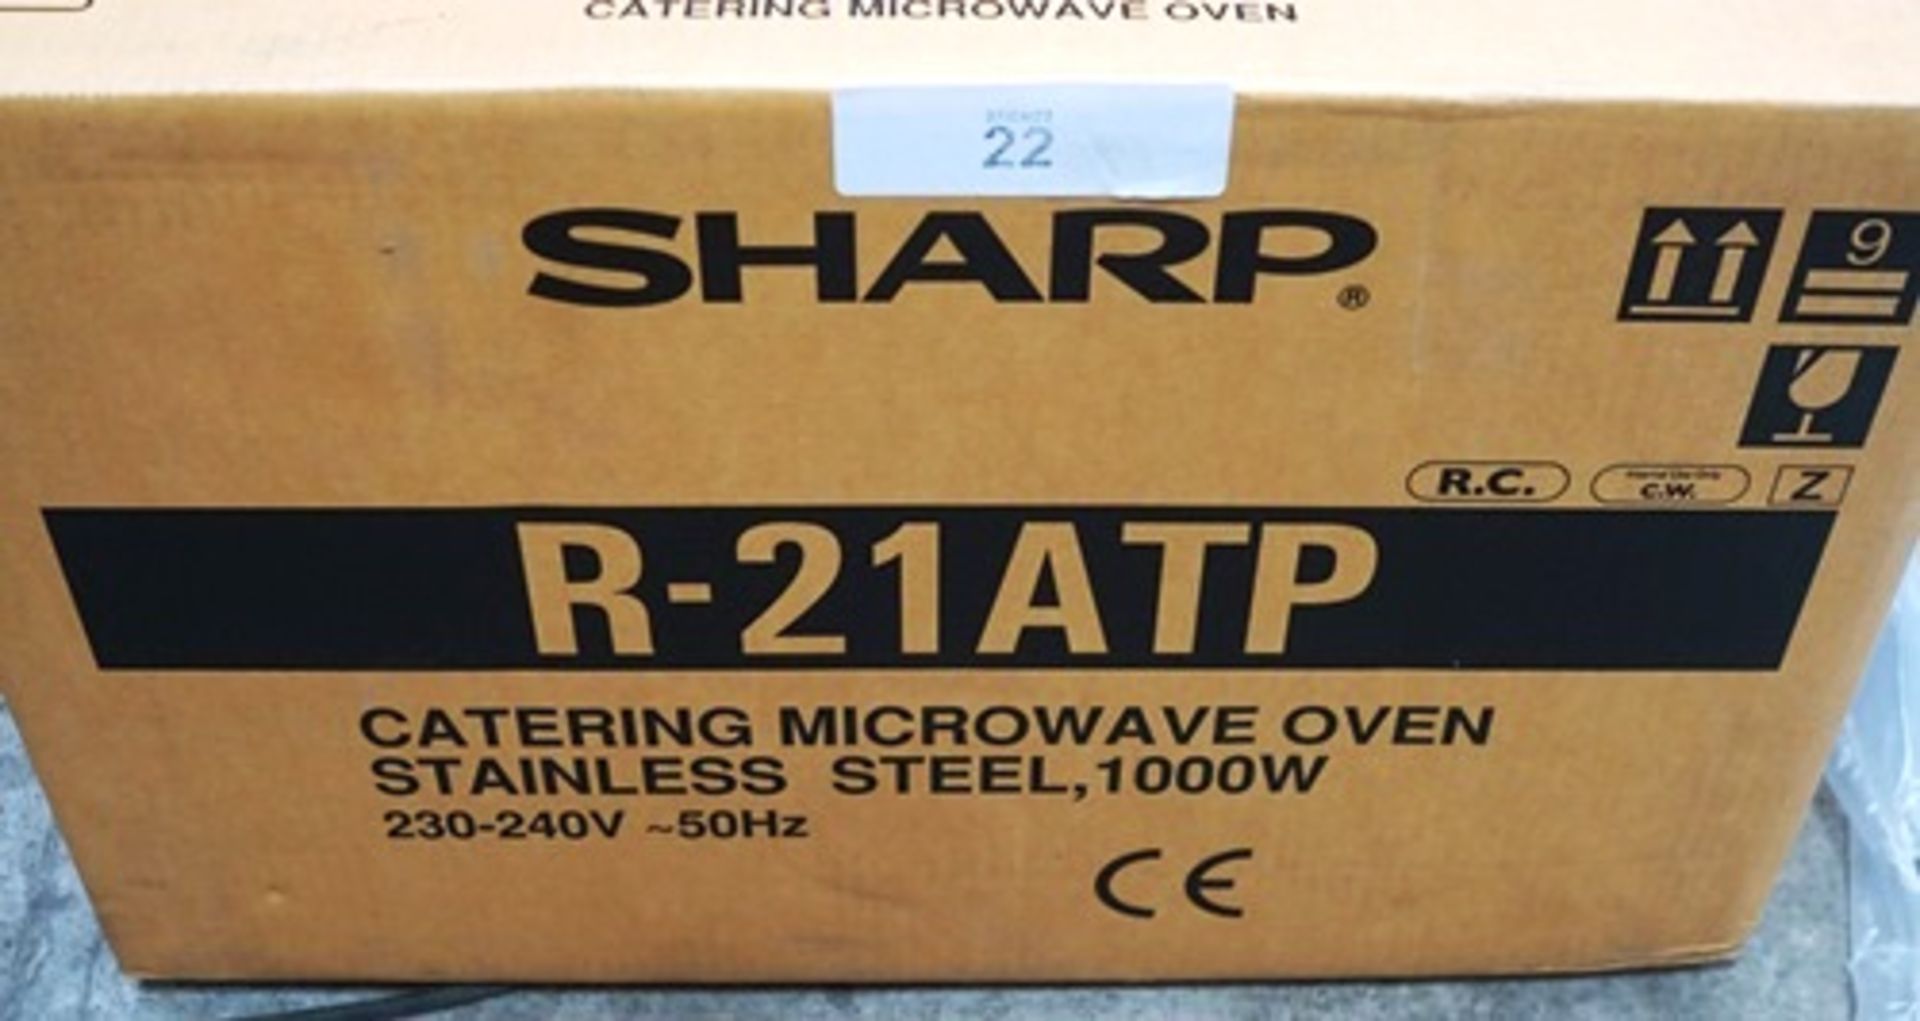 1 x Sharp R-21ATP 1000W commercial microwave, model MIC003R-21ATP - Sealed new in box (ES2)